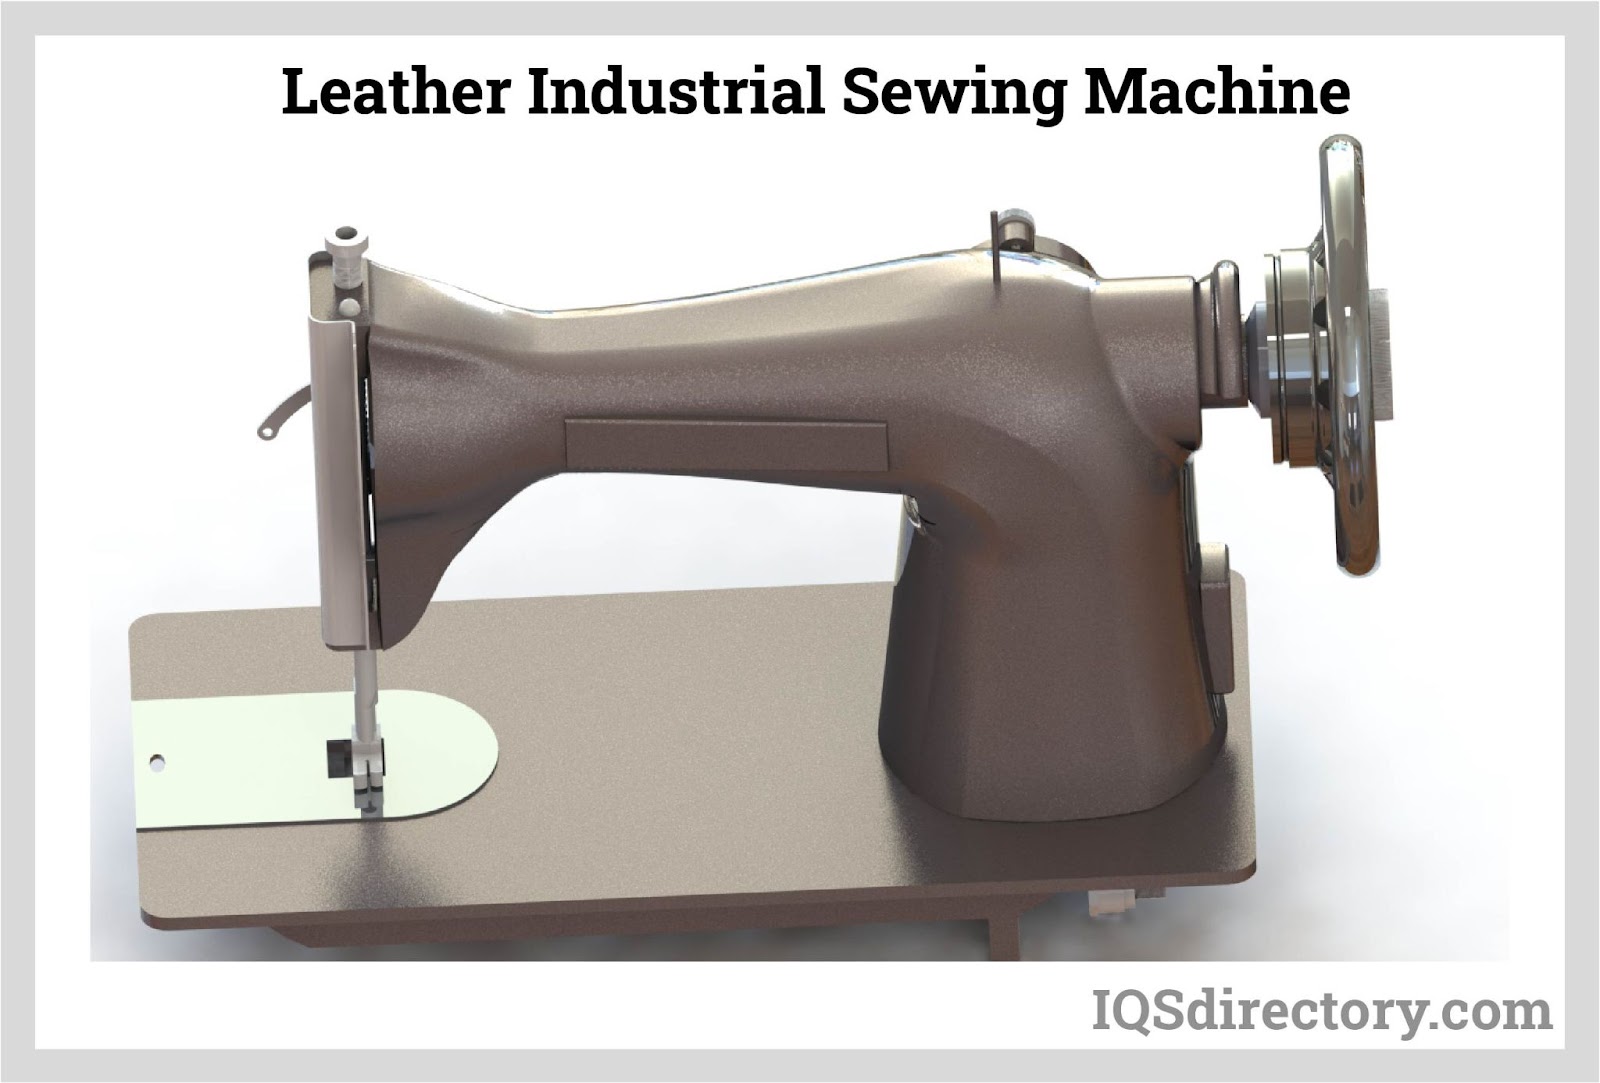 Leather Industrial Sewing Machine